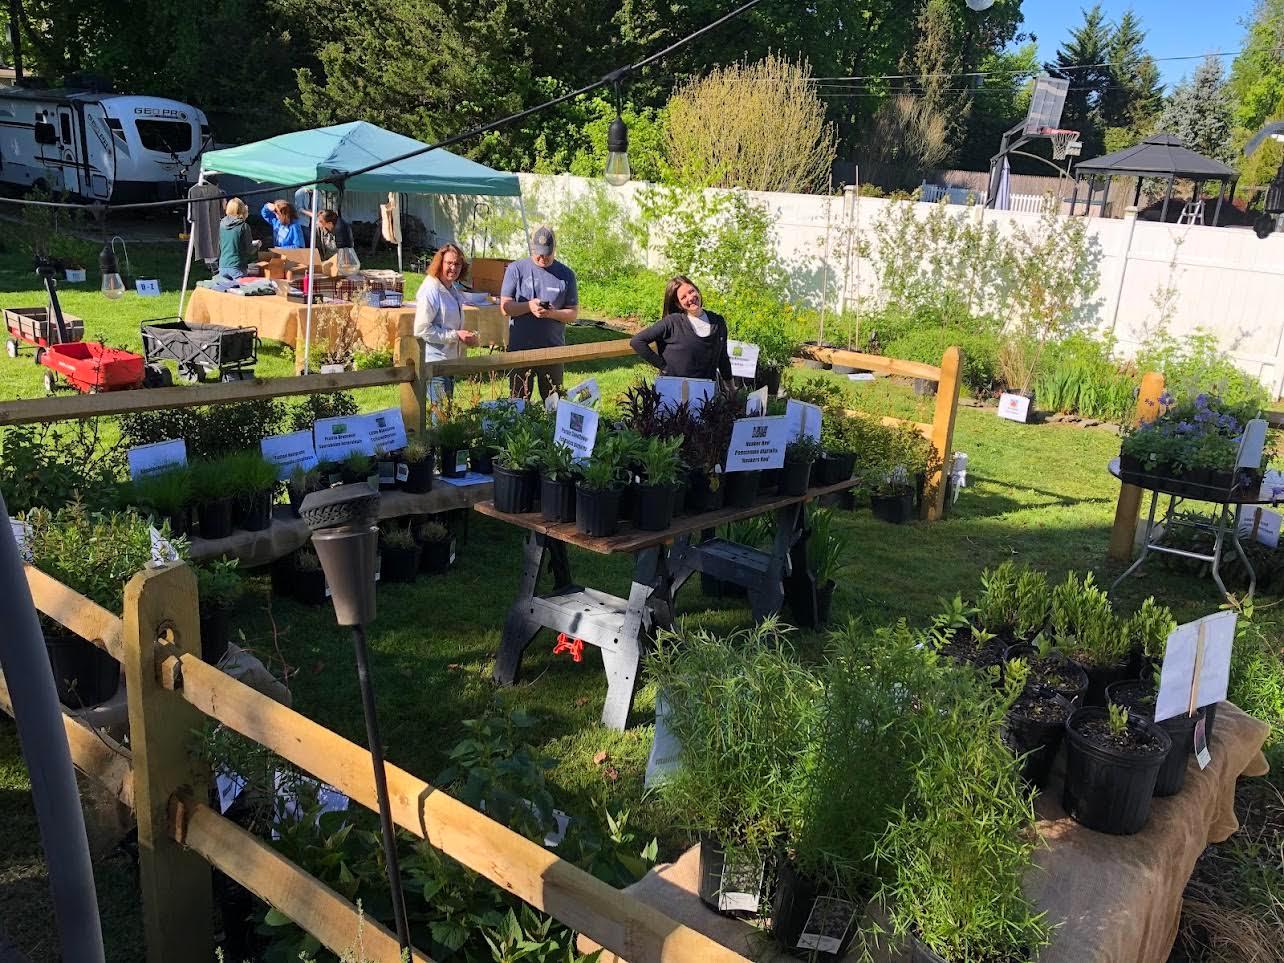 NNGI sold and distributed 2,200 native plants during their annual spring sale, contributing to five local garden installments including those at the Northport Public Library and Dix Hills Fire Department.